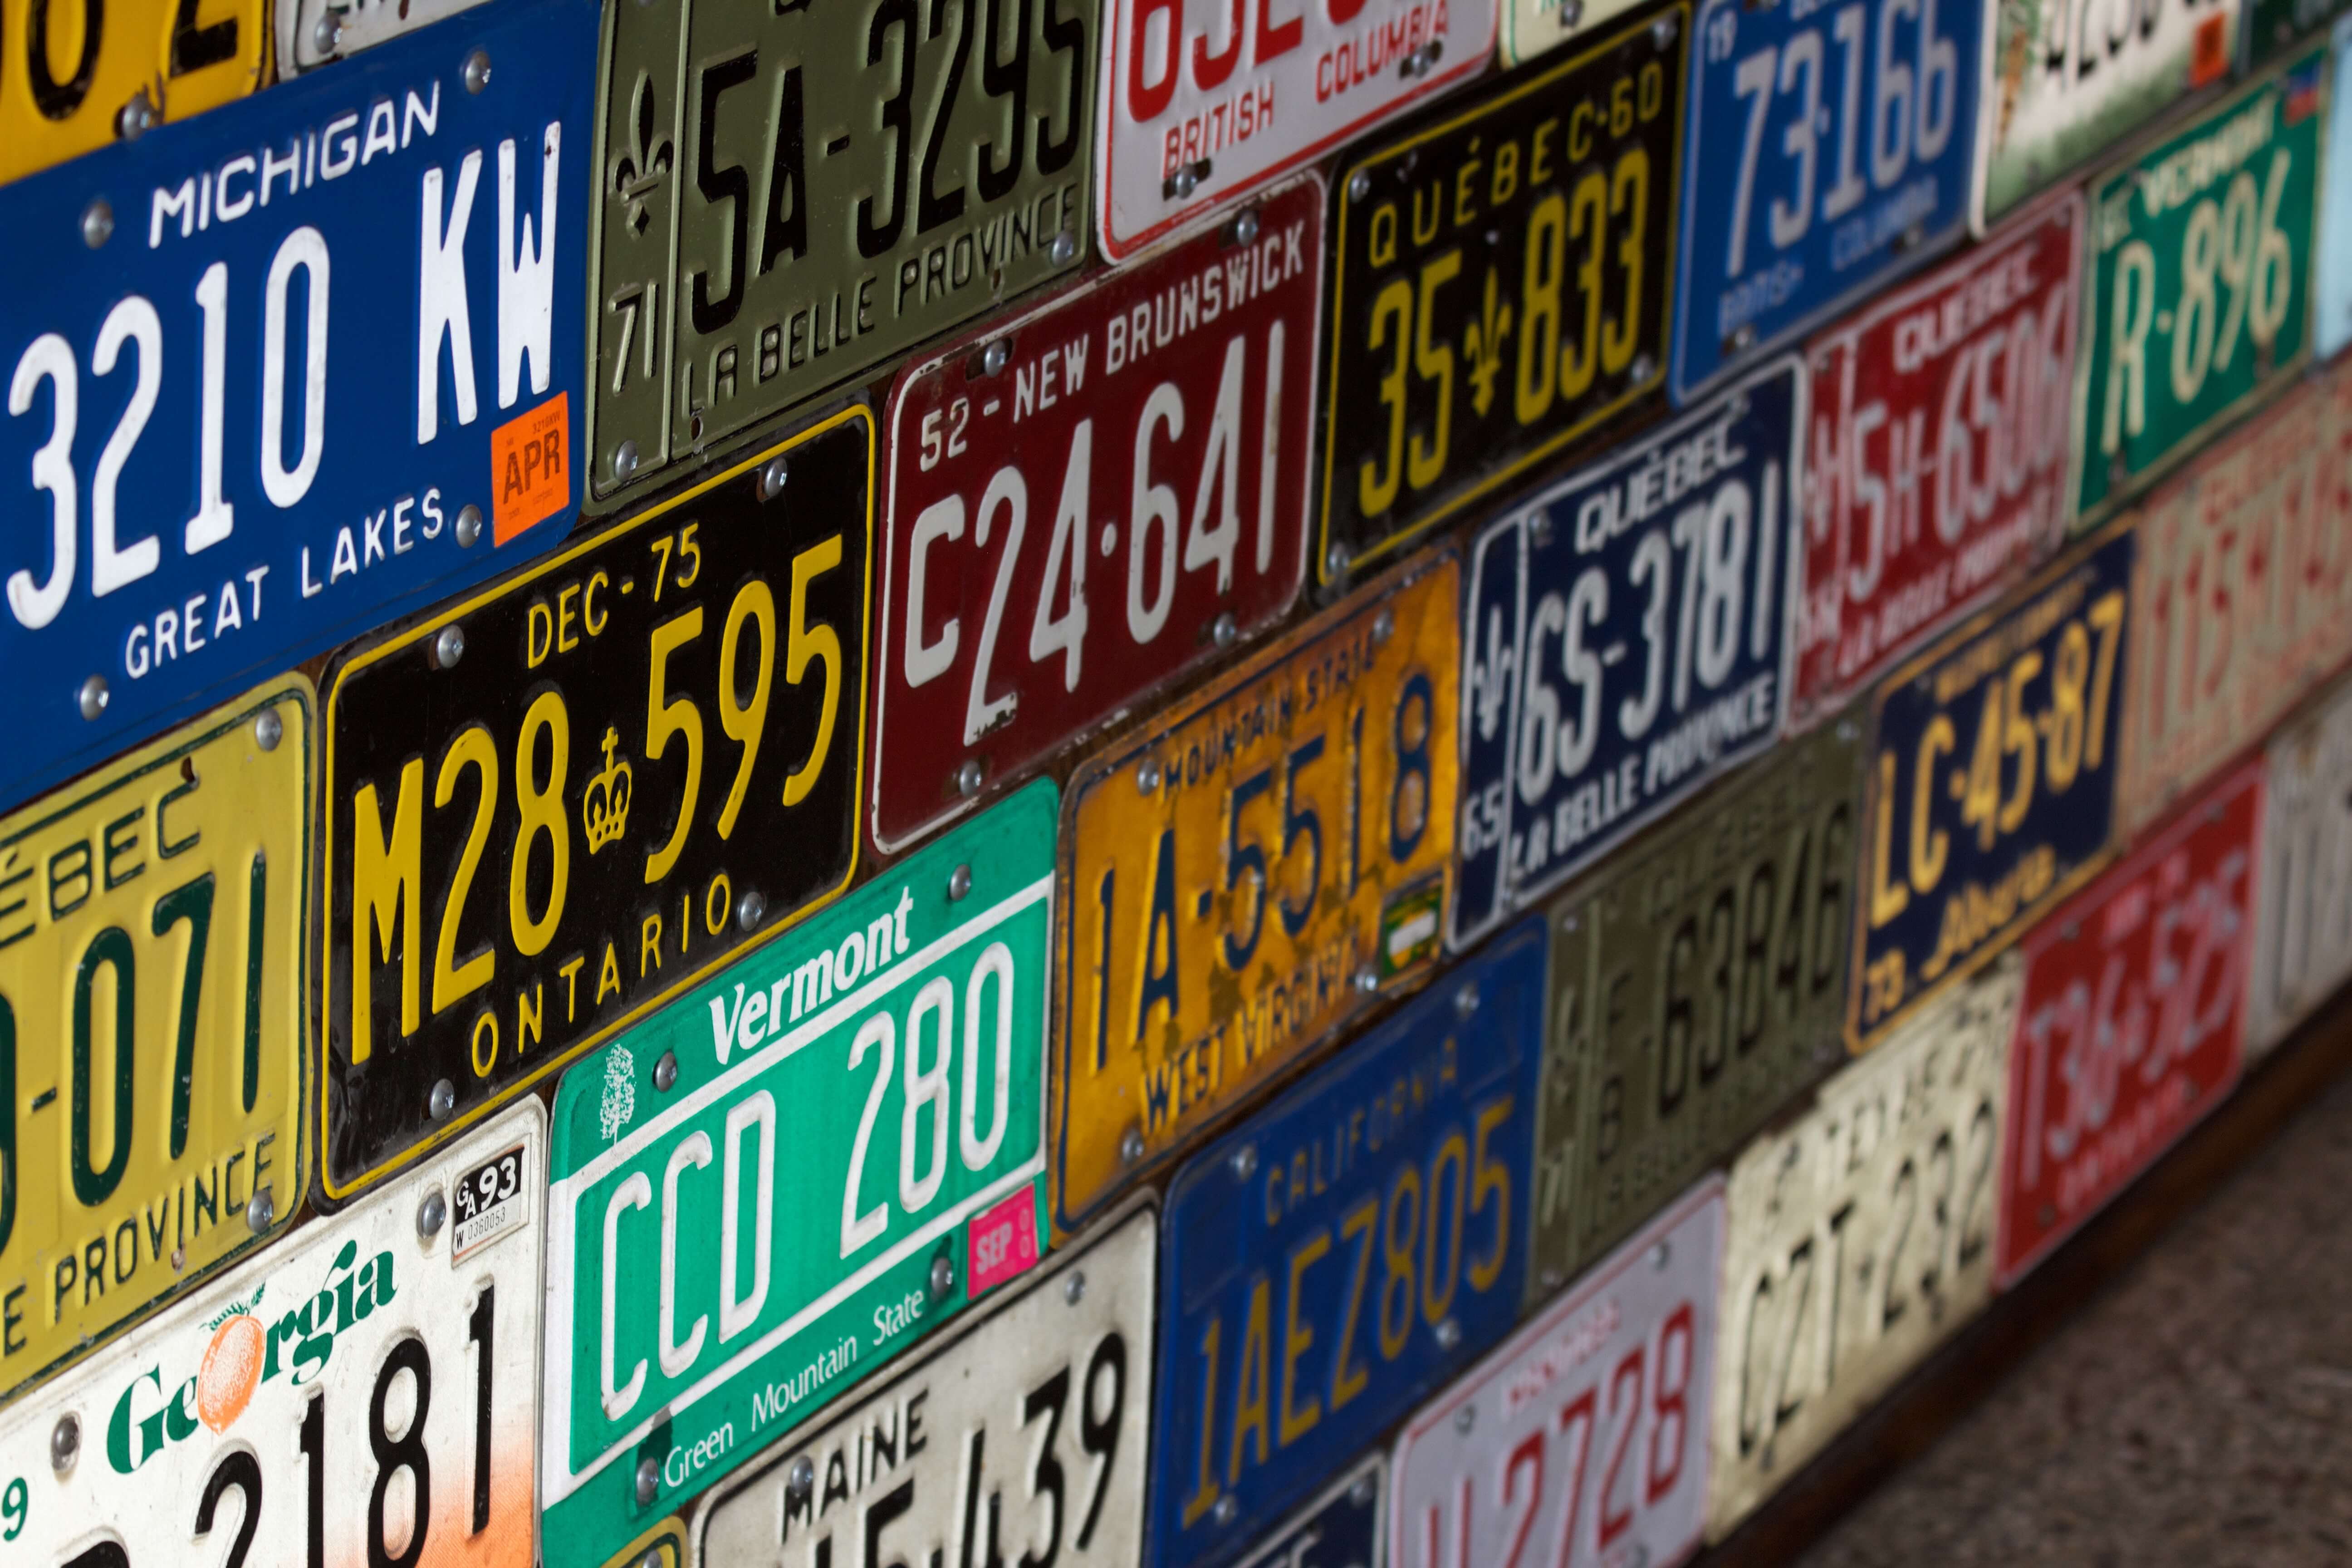 New or Transferred License Plates